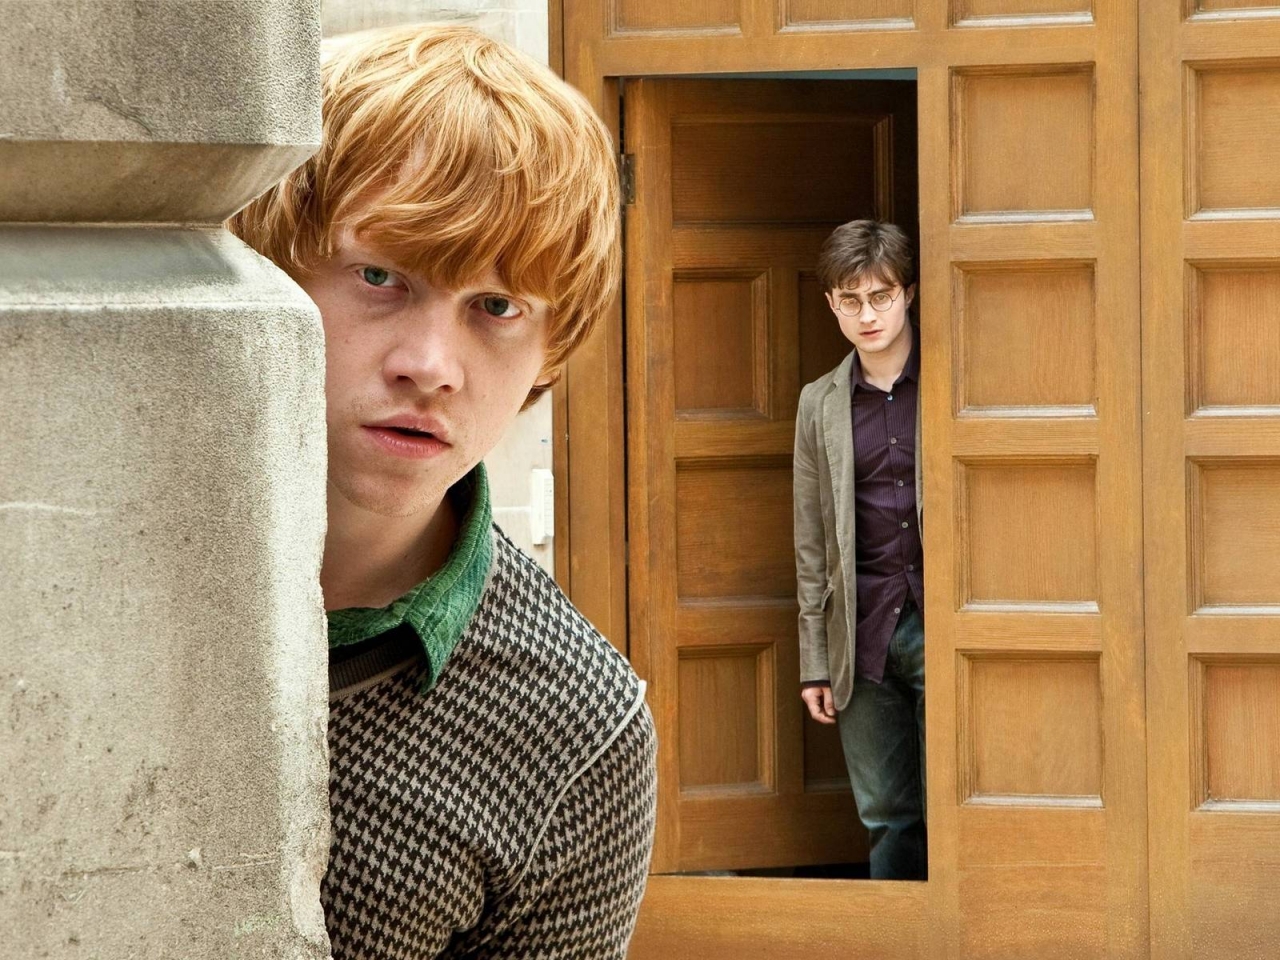 Daniel Radcliffe and Rupert Grint for 1280 x 960 resolution